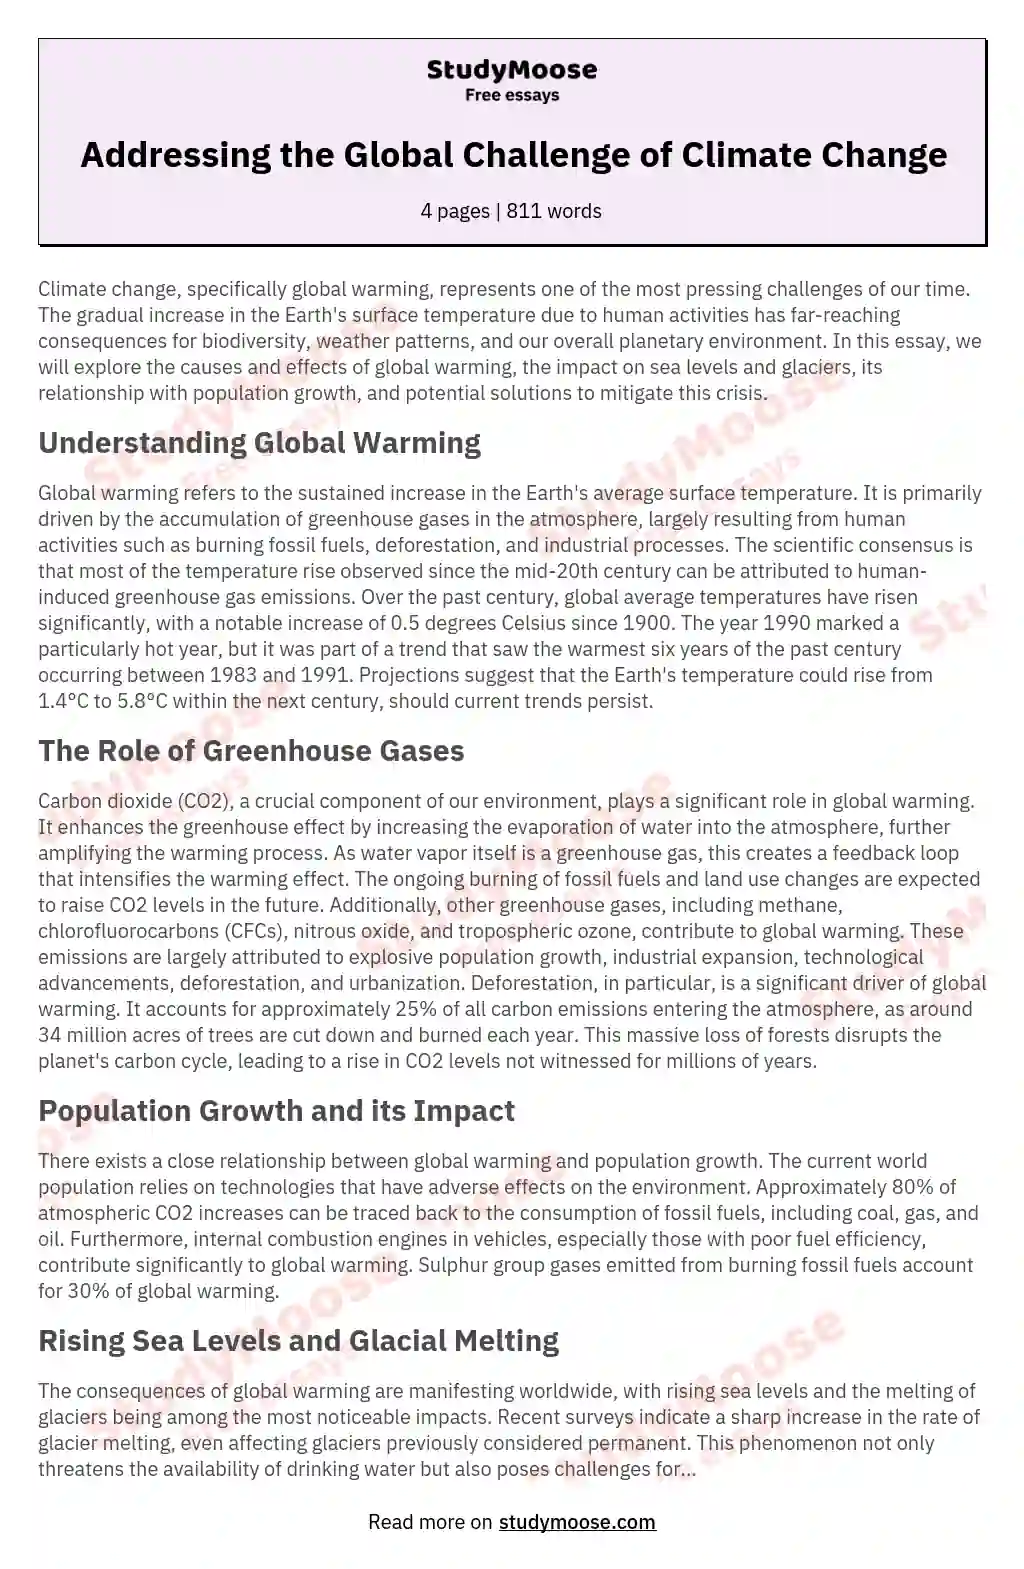 Global Warming : causes, effects and remedies